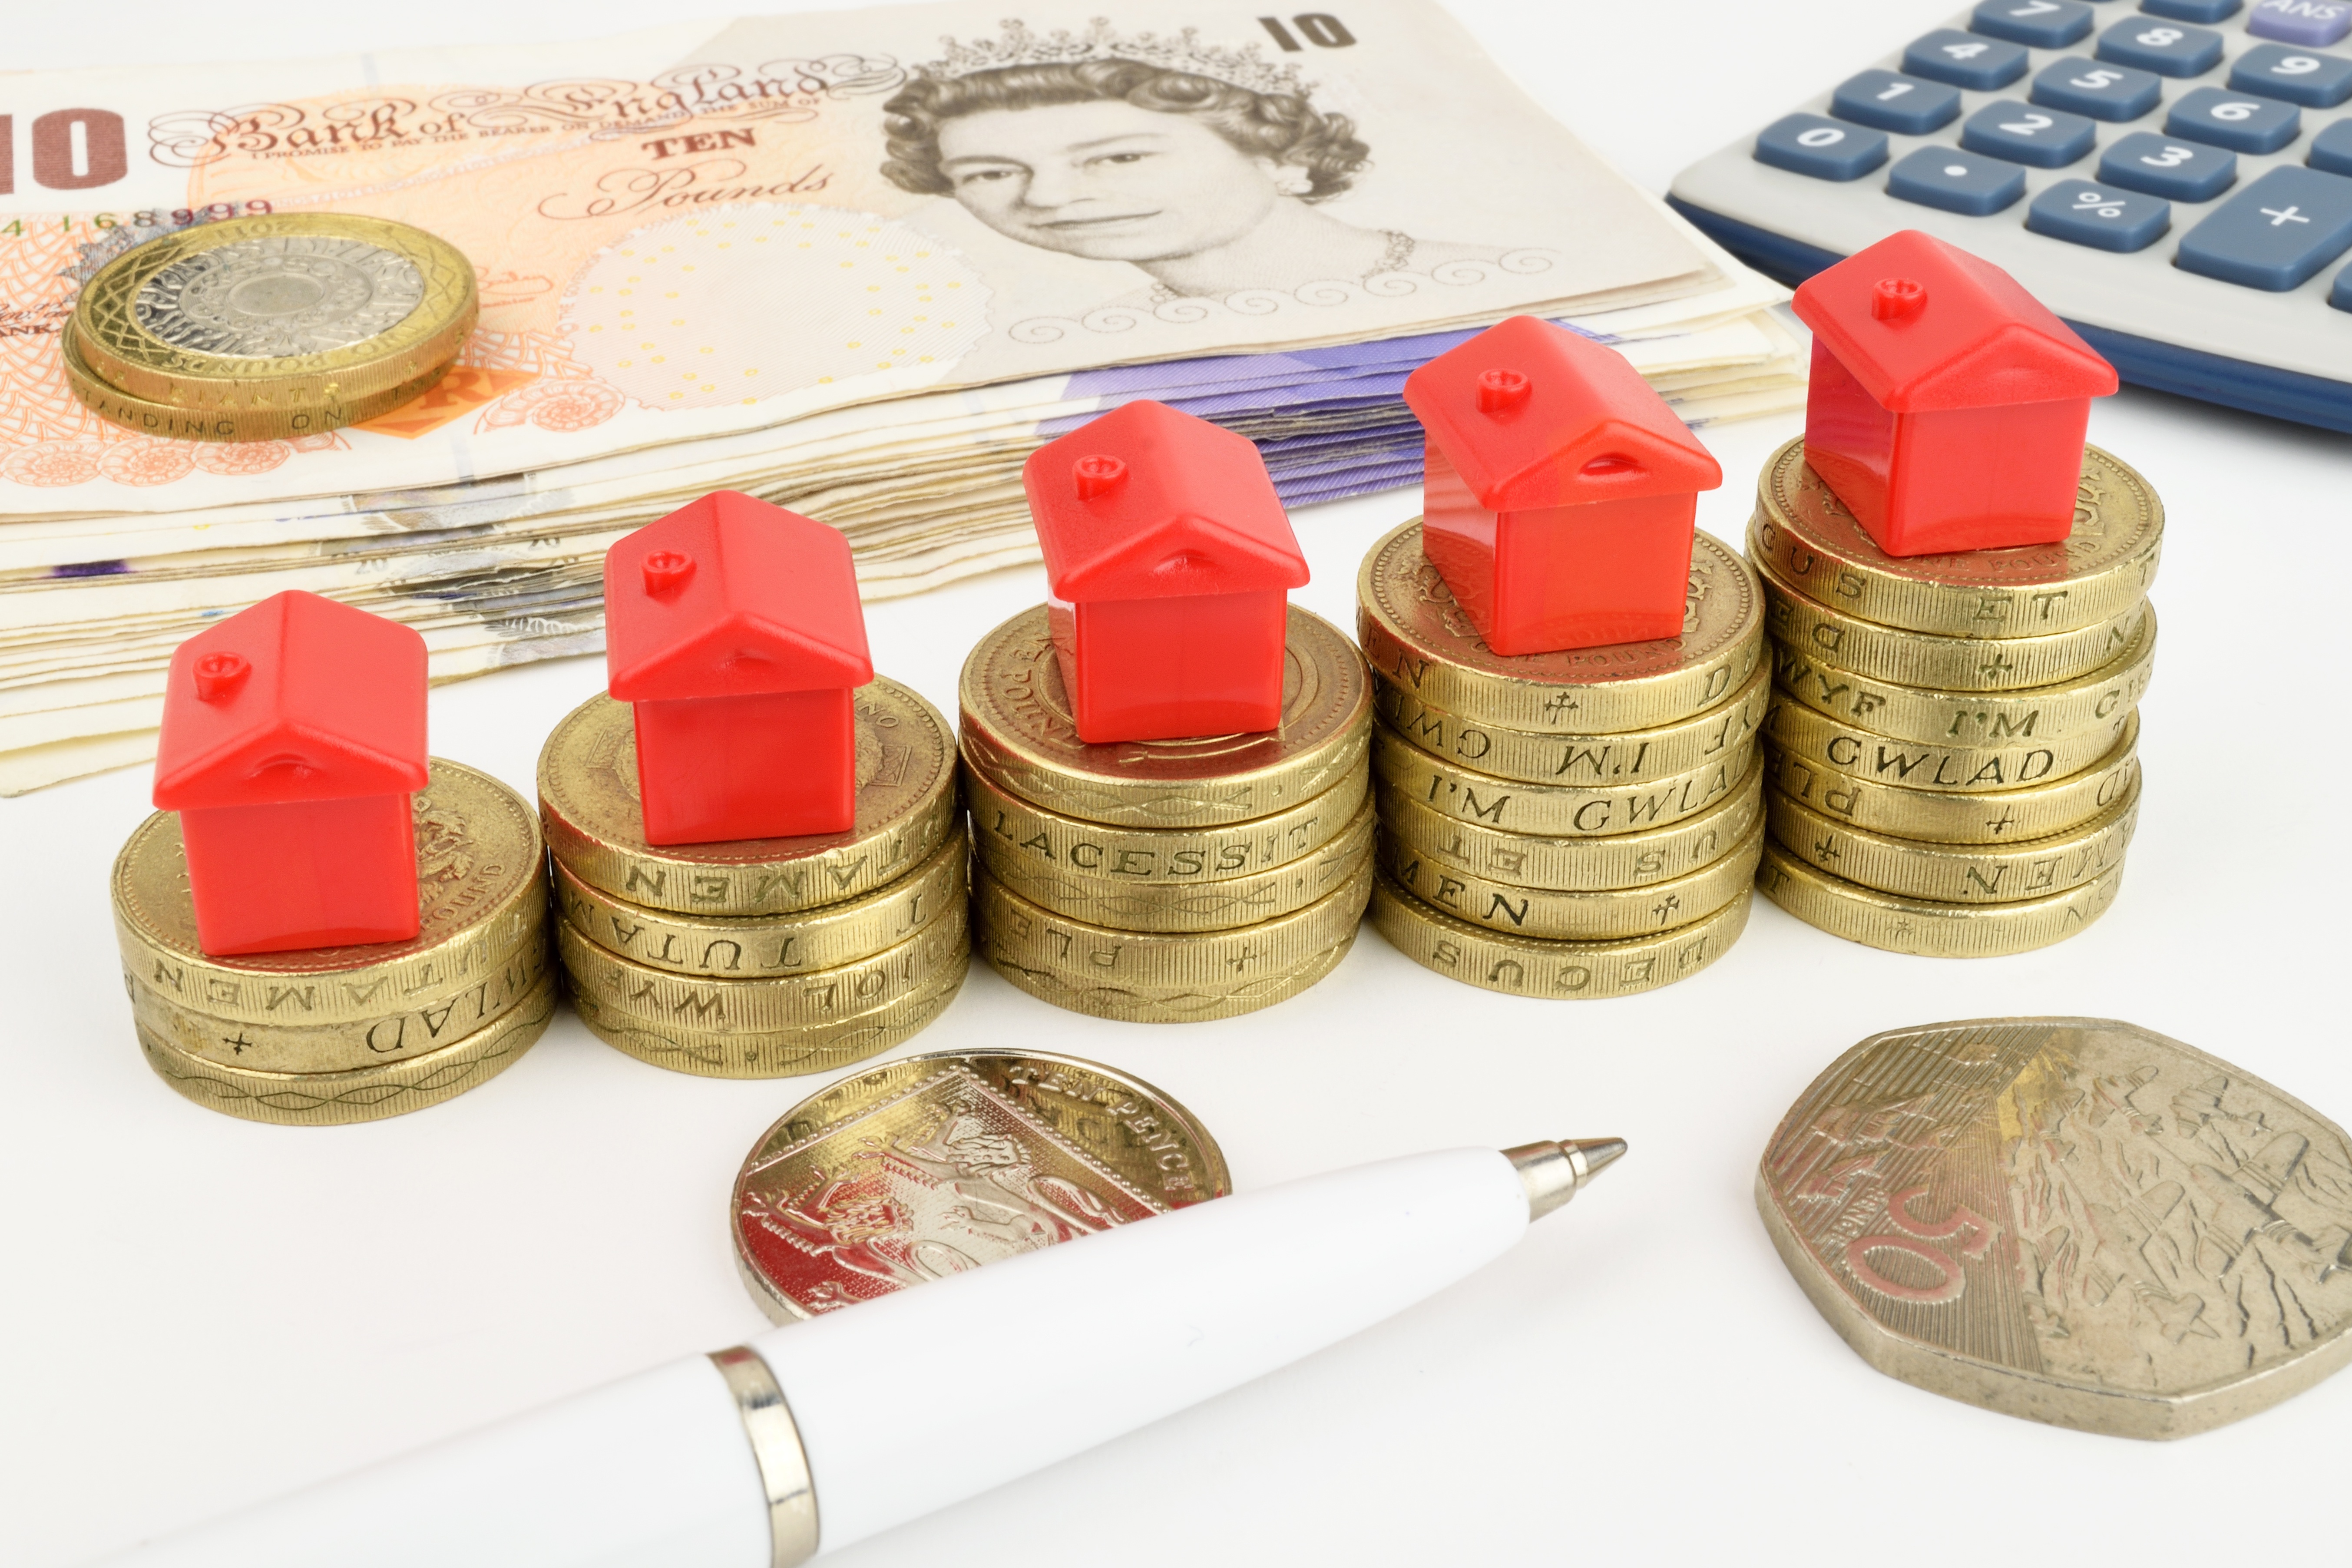 Buy-to-let rates set to rise